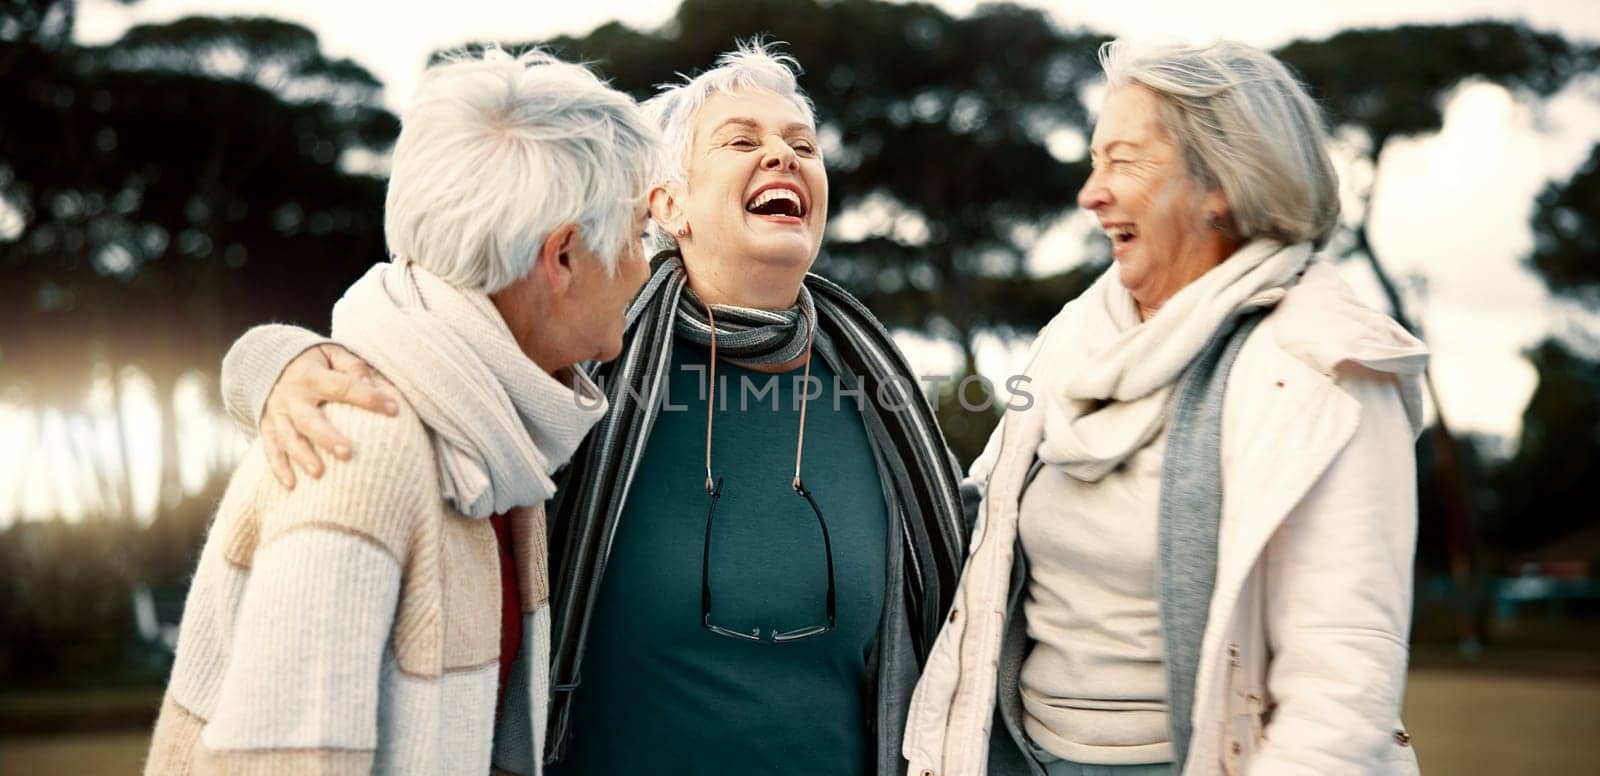 Talking, funny and senior woman friends outdoor in a park together for bonding during retirement. Happy, smile and laughing with a group of elderly people chatting in a garden for humor or fun by YuriArcurs